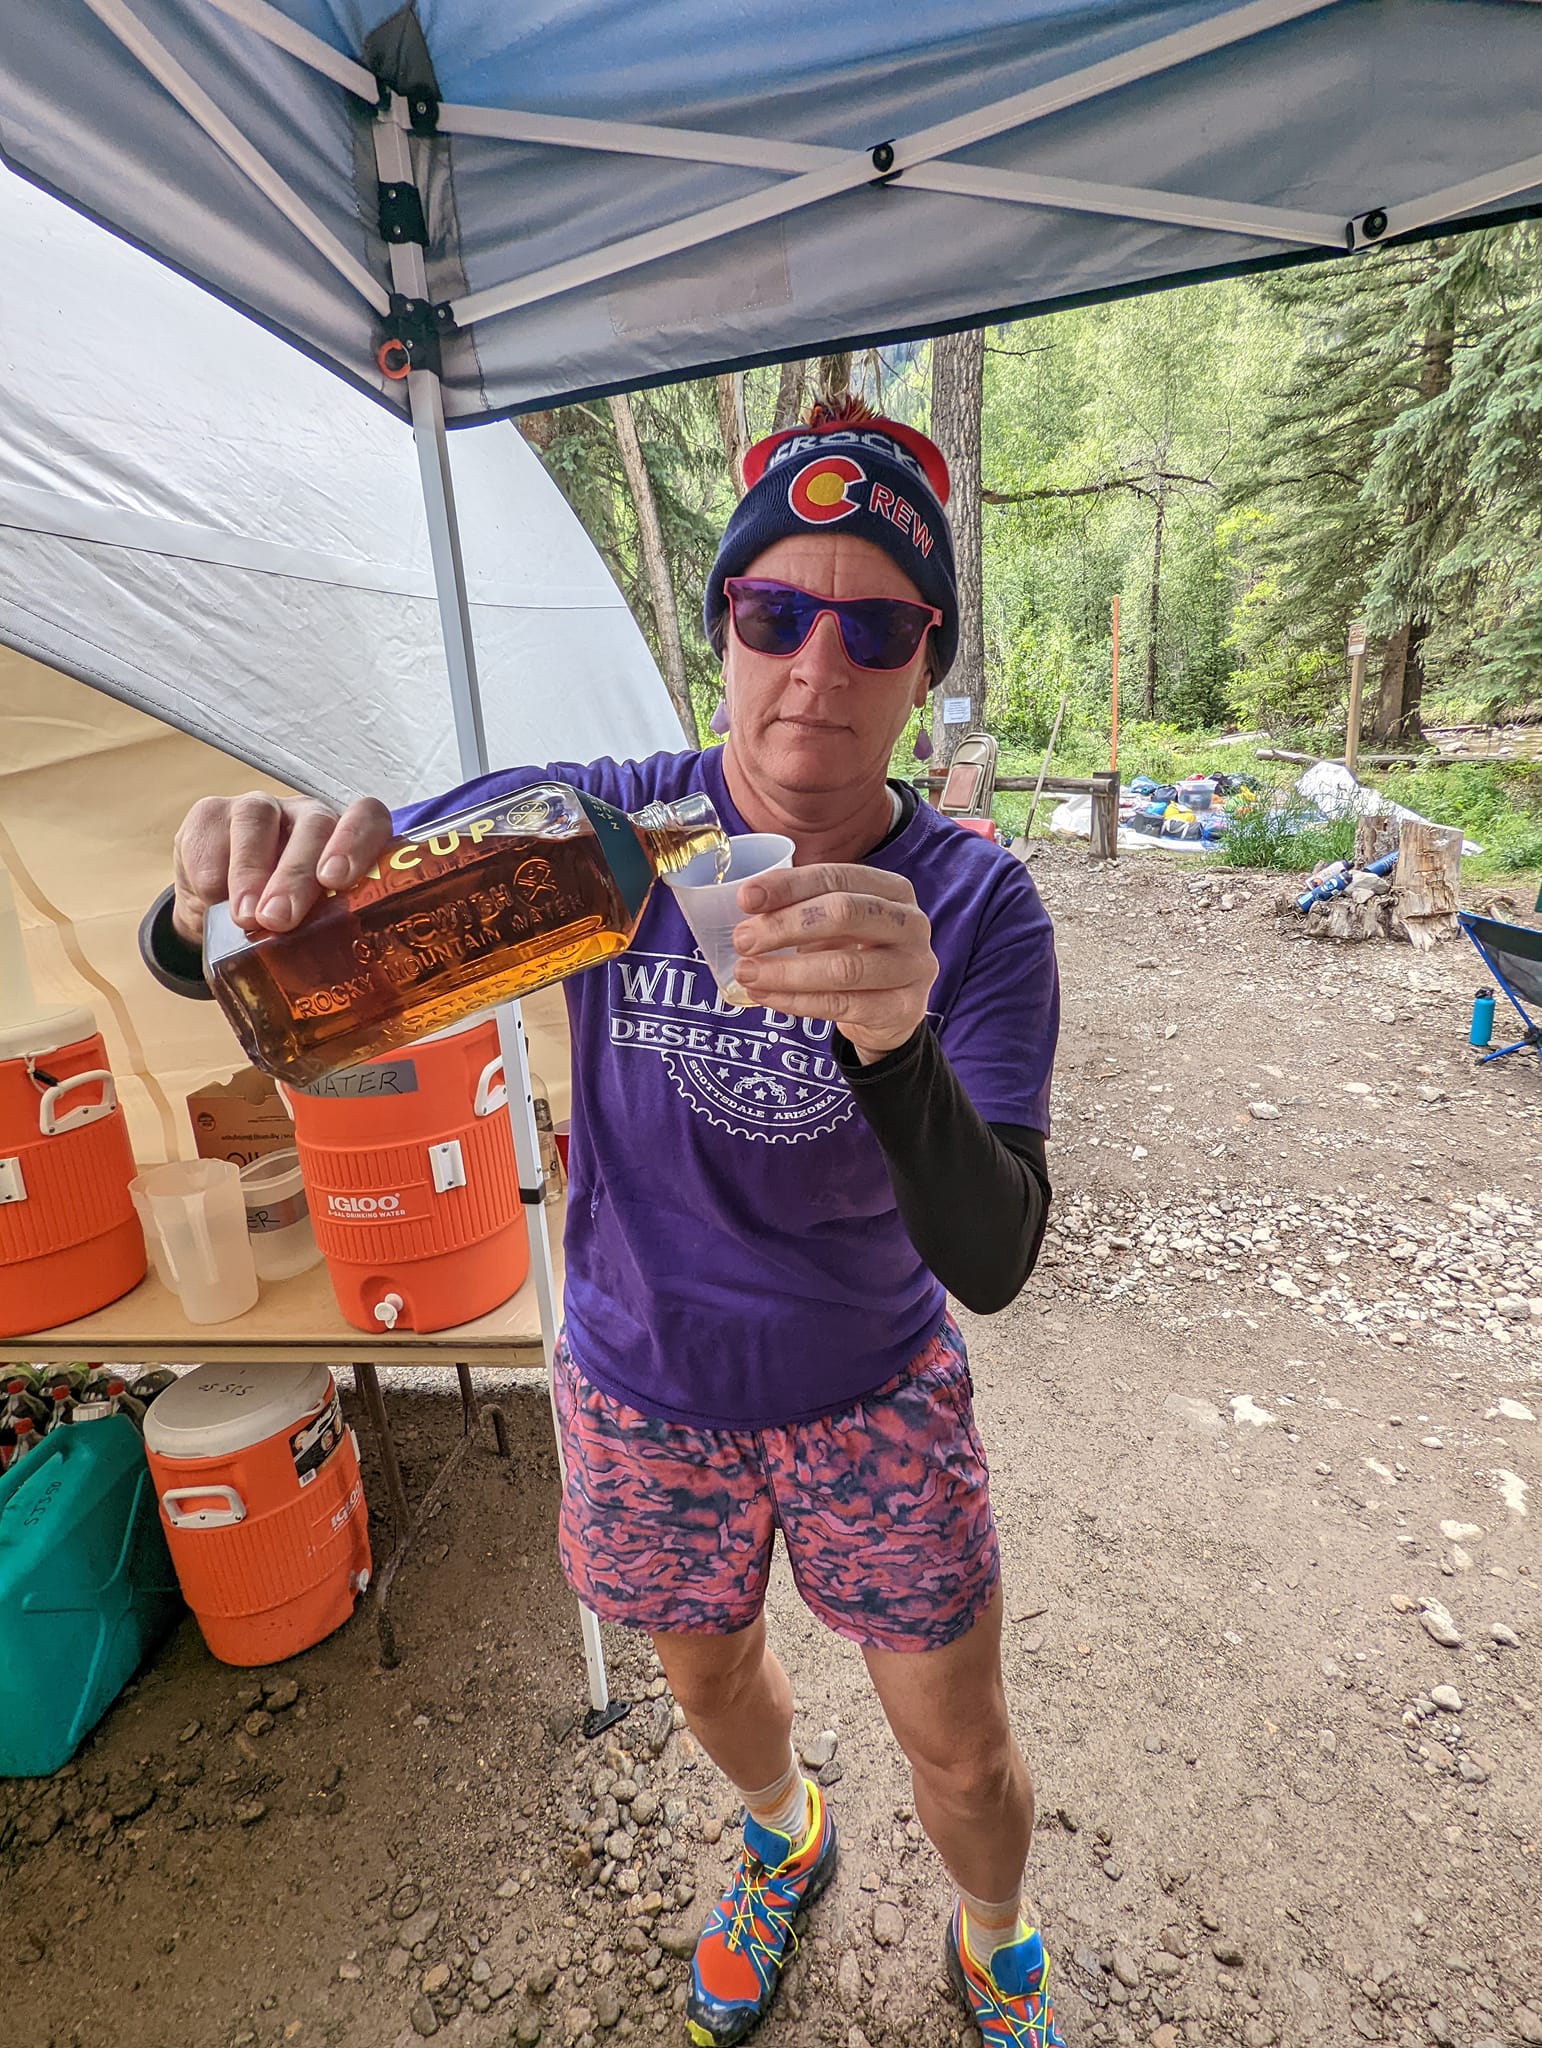 Laurel pours one of the Tin Cup Shots offered to participants at the Sherman Aid Station during the Hard Rock 100 endurance race.